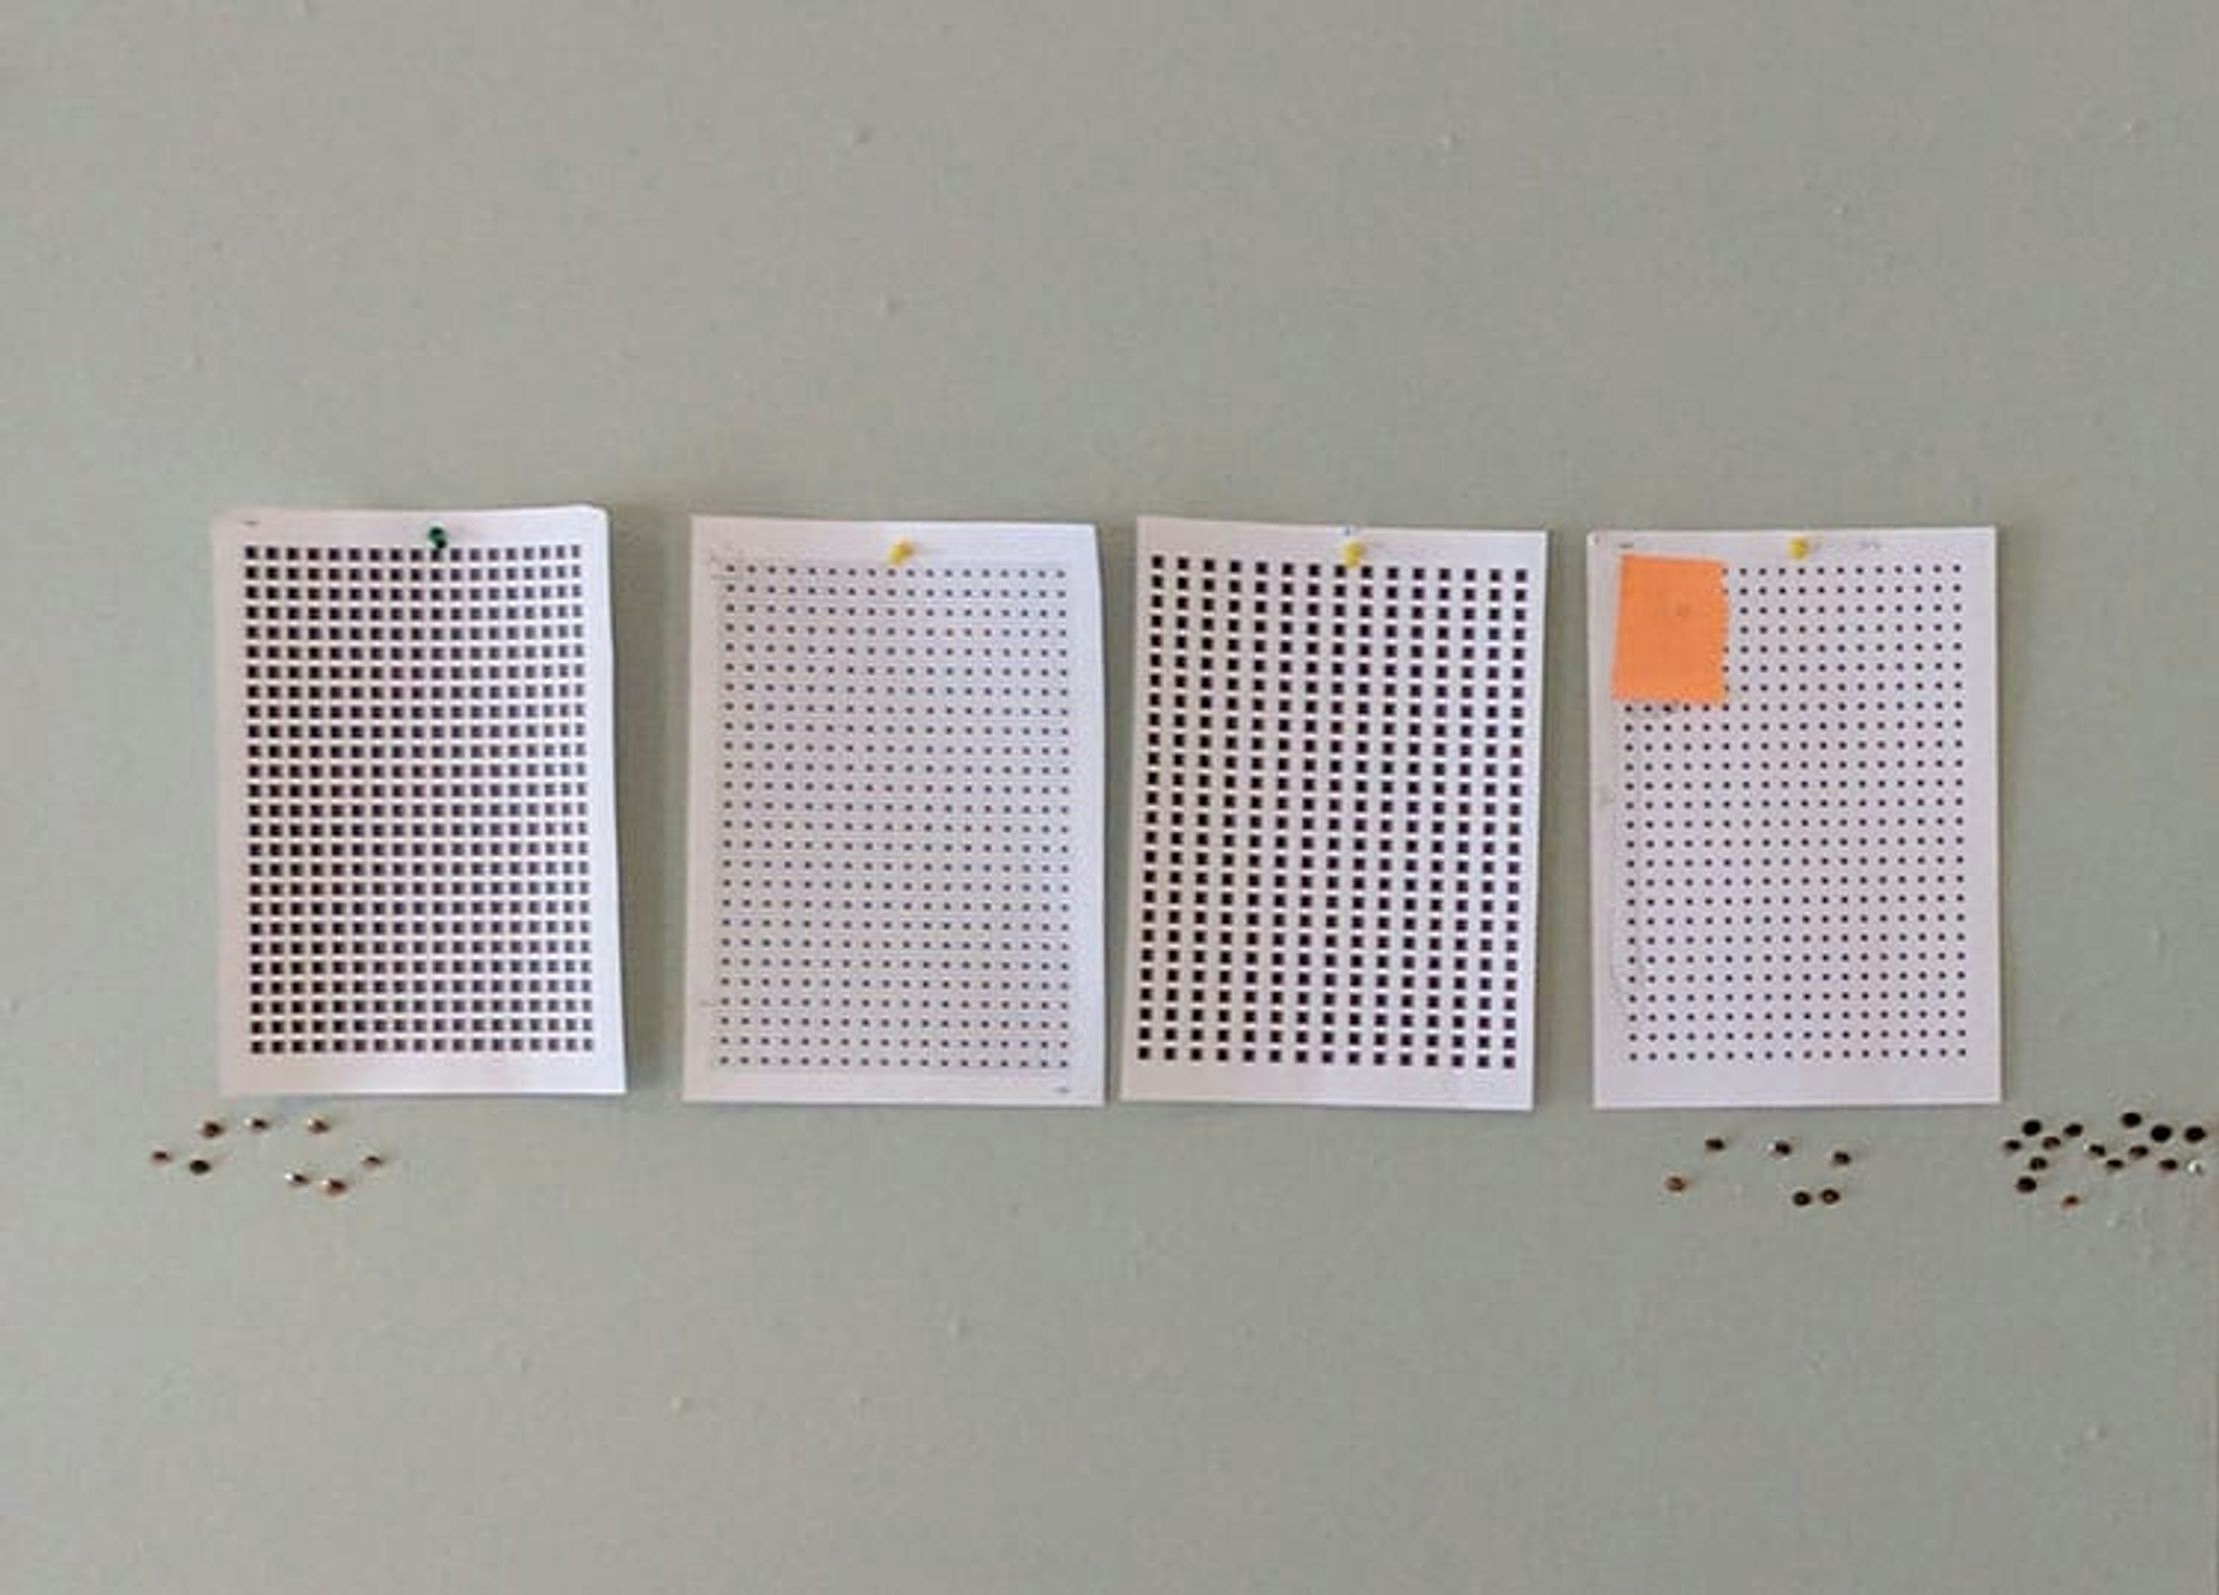 Four sheets of paper pinned to a board and printed with grids of different dot sizes, used to test their visibility at a distance.